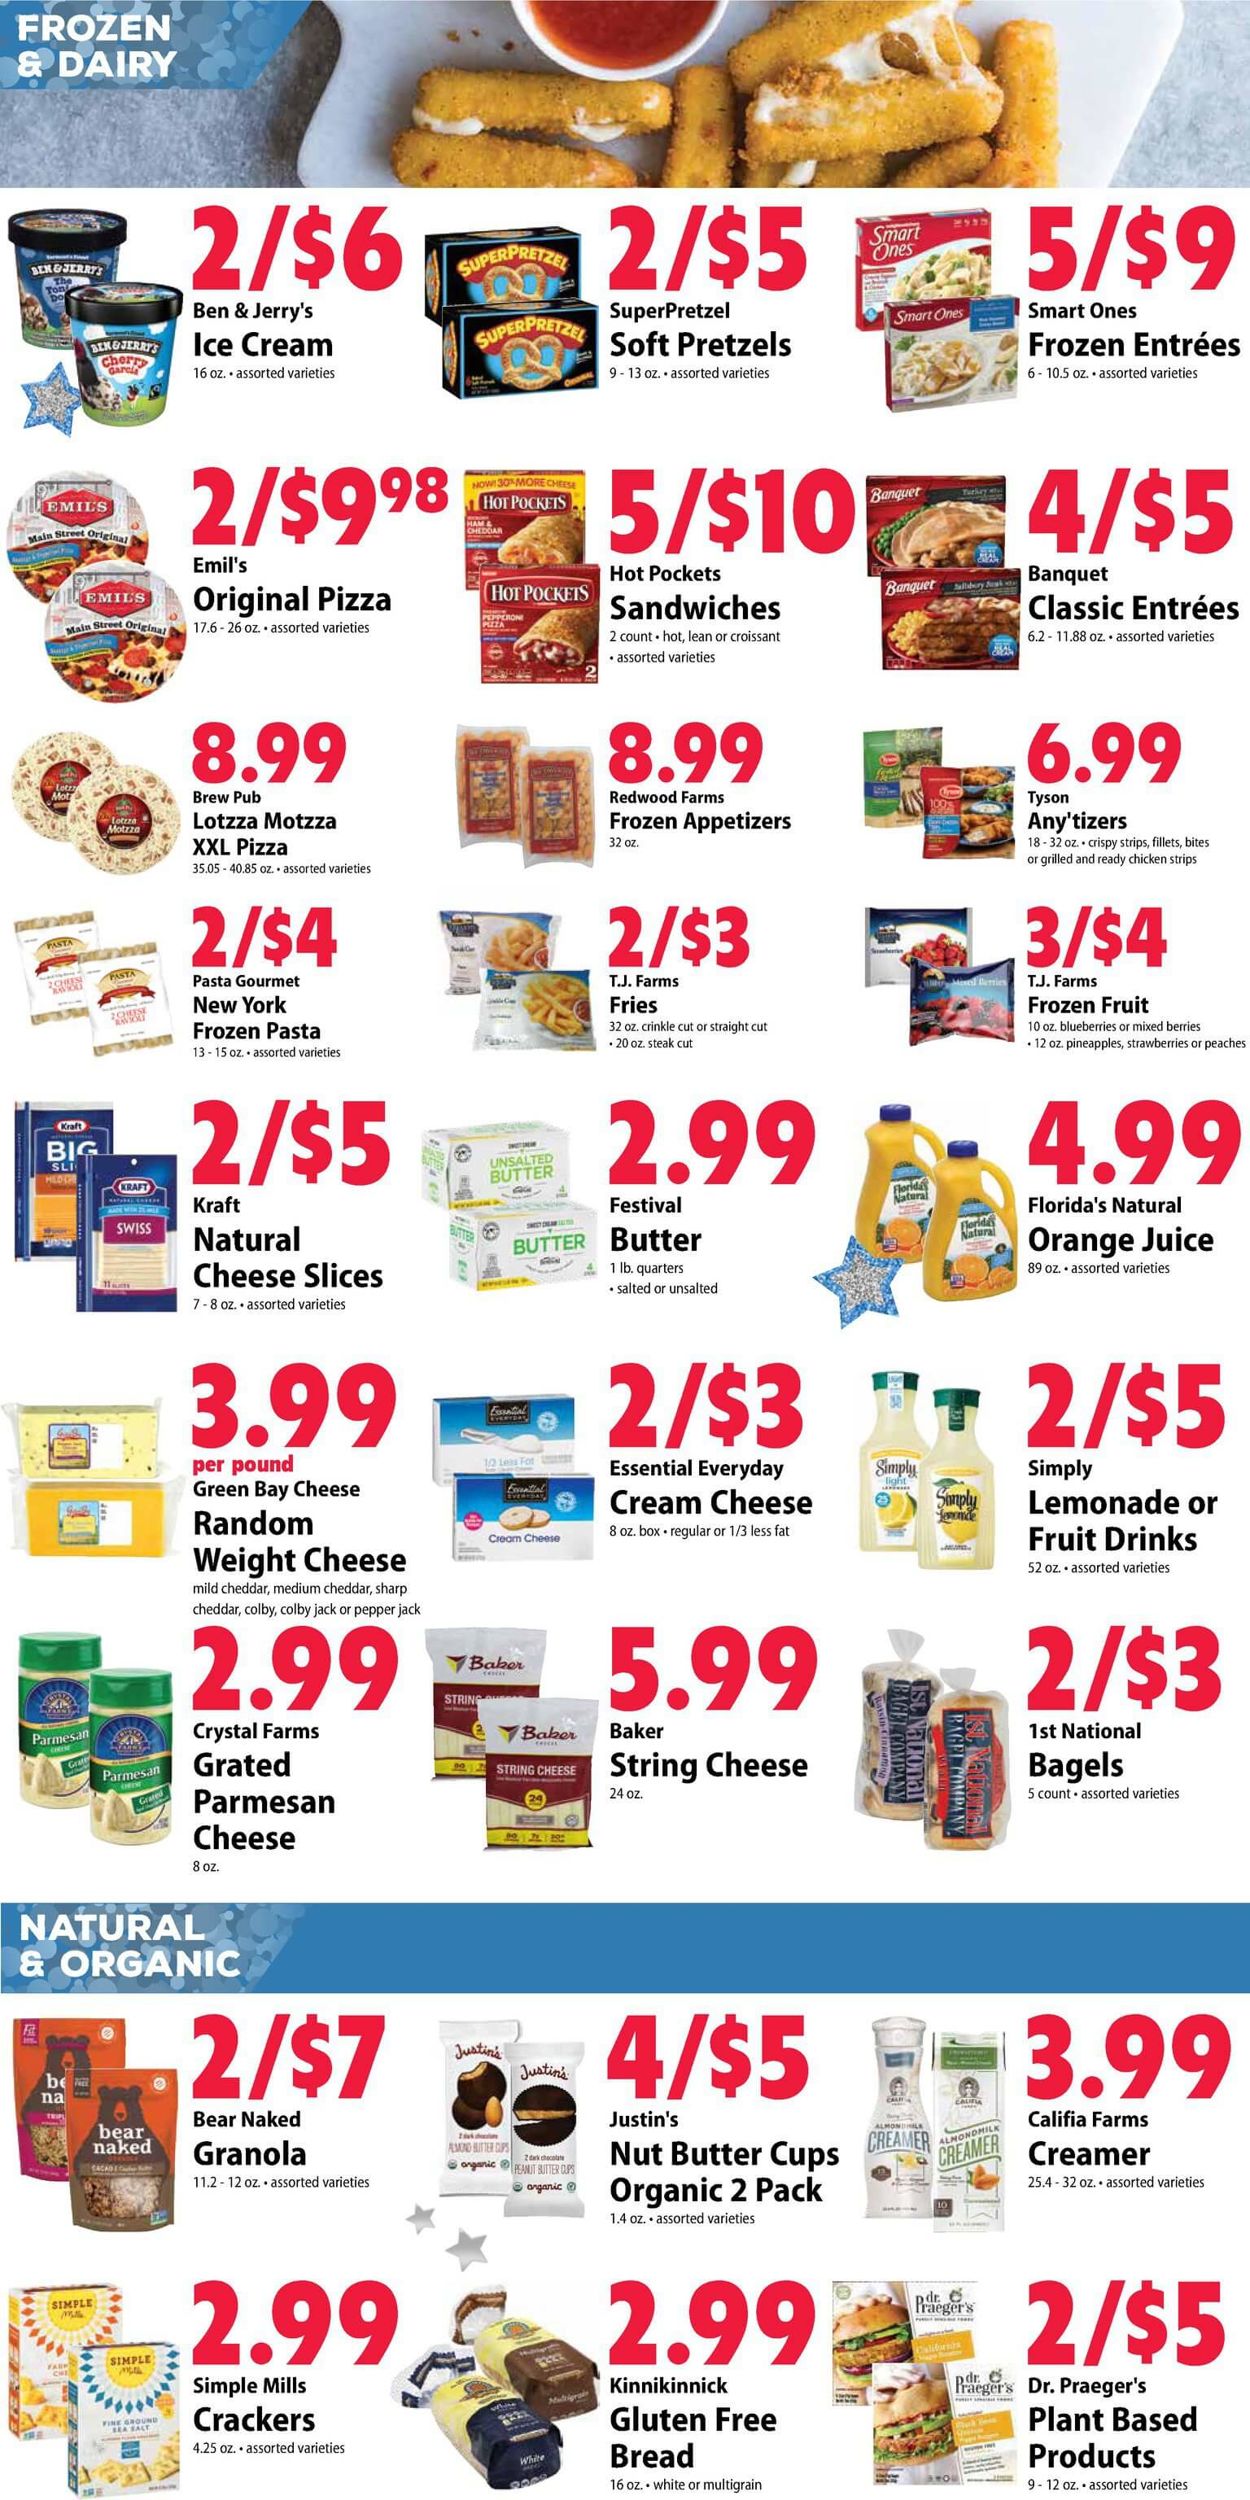 Festival Foods - New Year's Ad 2019/2020 Weekly Ad Circular - valid 12/25-12/31/2019 (Page 7)